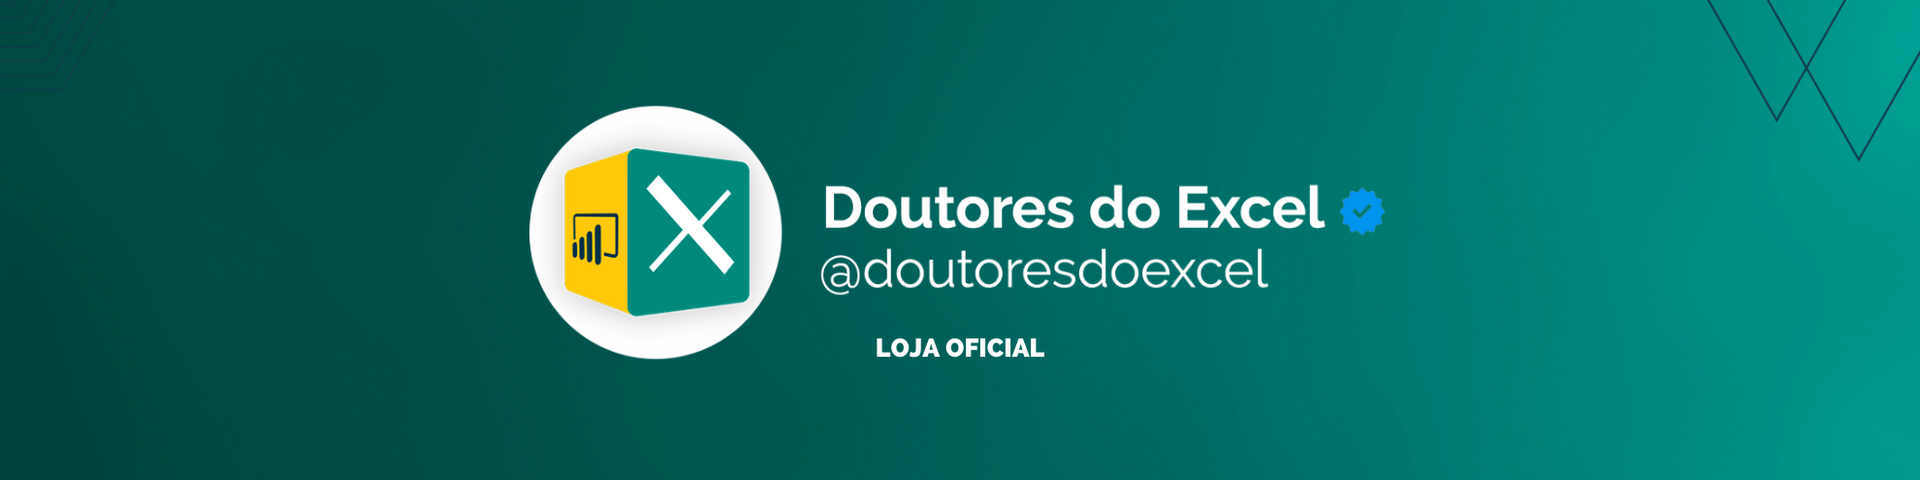 Loading PNG - Doutores do Excel